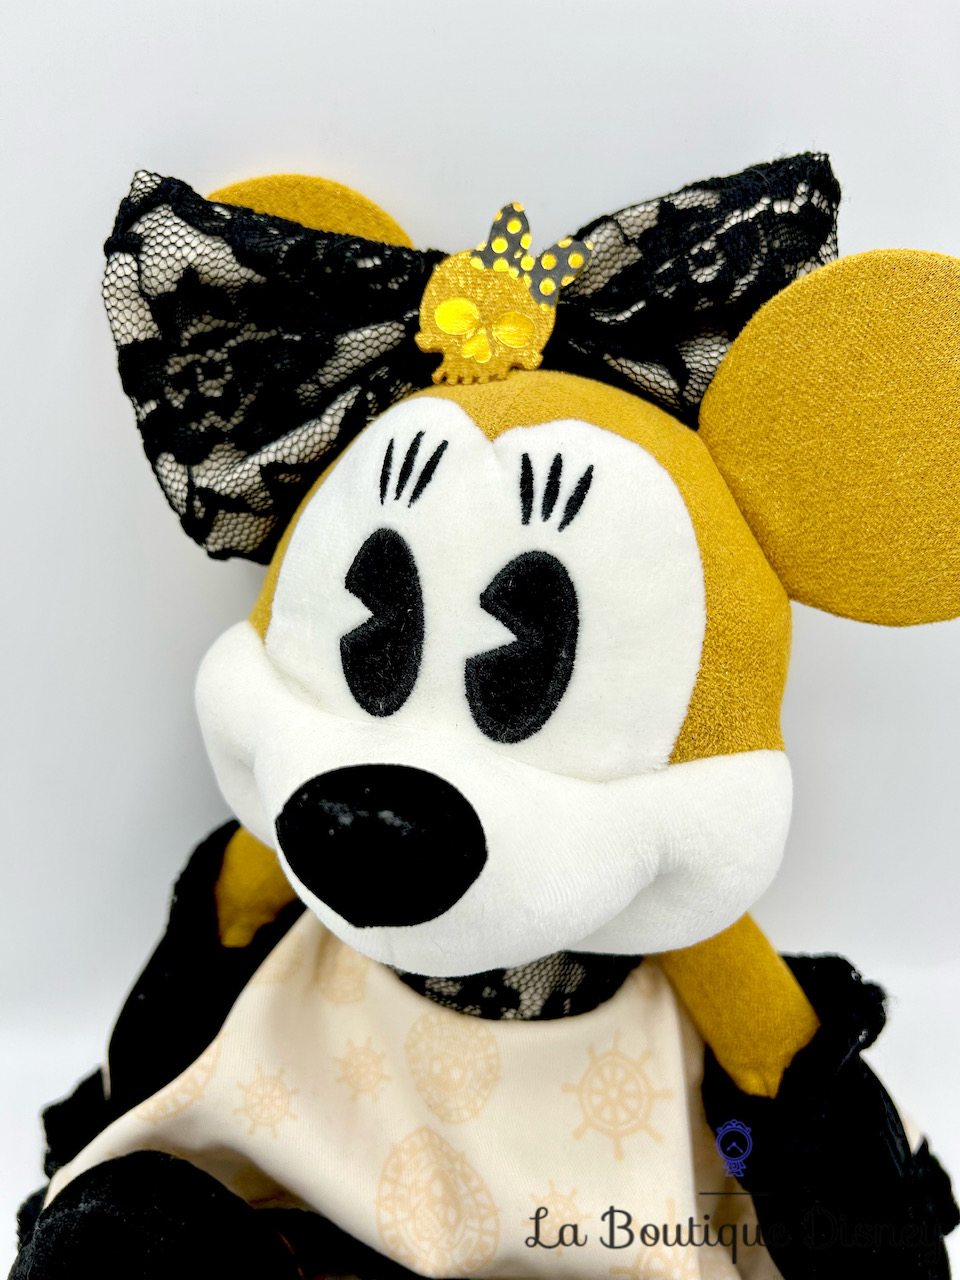 peluche-minnie-mouse-main-attraction-2-12-pirates-of-the-caribbean-disney-store-édition-limitée-1